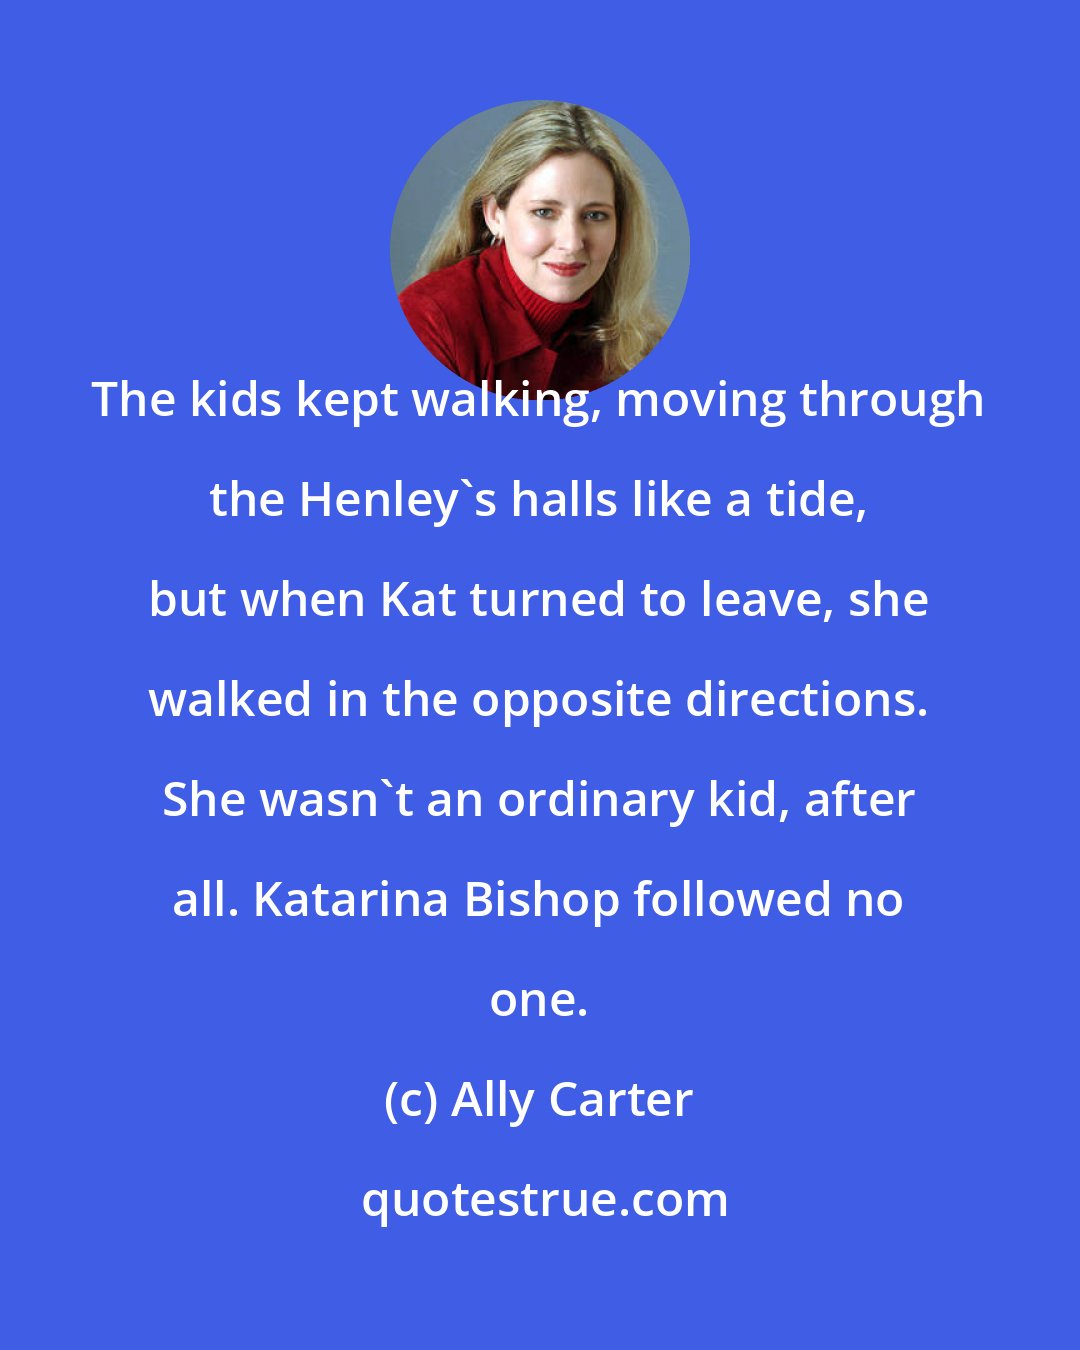 Ally Carter: The kids kept walking, moving through the Henley's halls like a tide, but when Kat turned to leave, she walked in the opposite directions. She wasn't an ordinary kid, after all. Katarina Bishop followed no one.